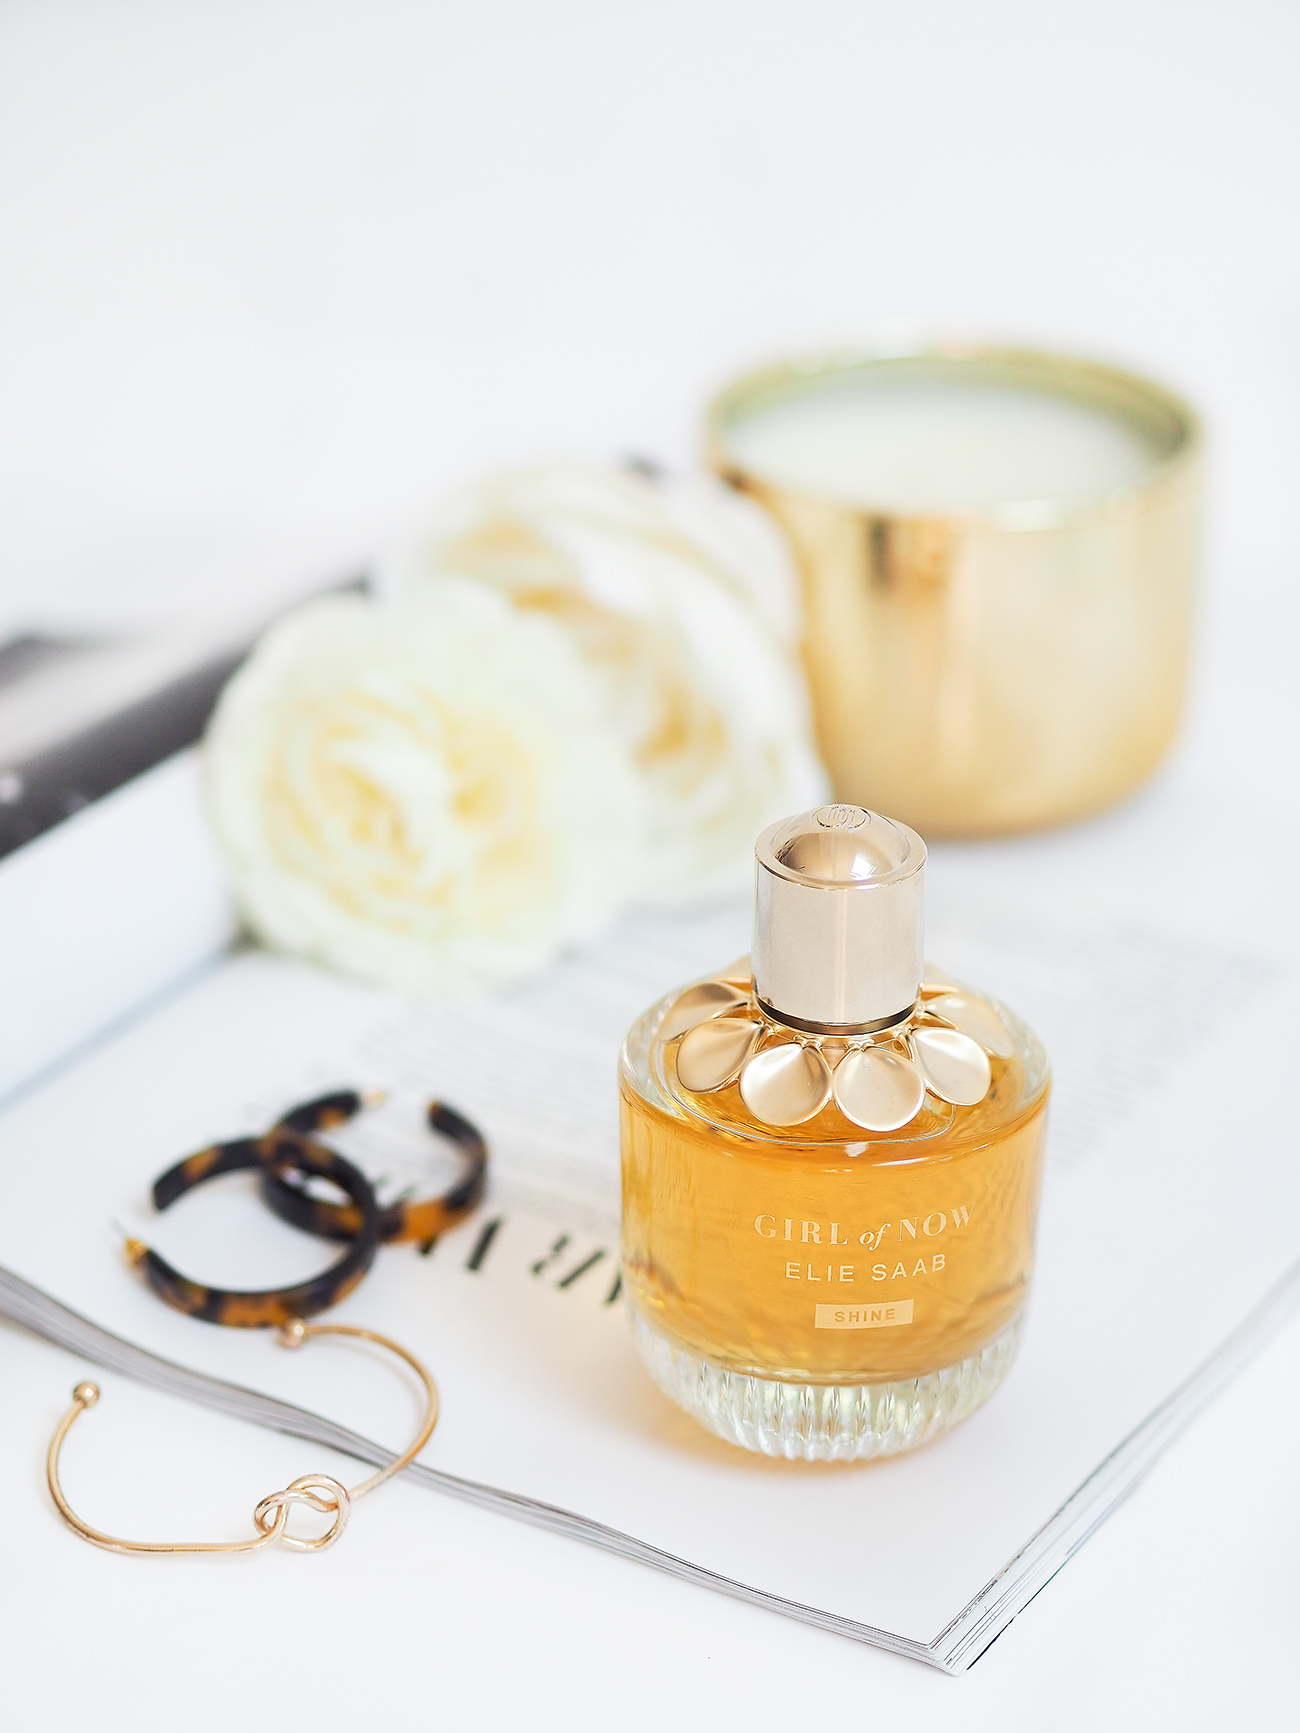 new perfumes for Summer Ellie Saab Girl of Now Shine